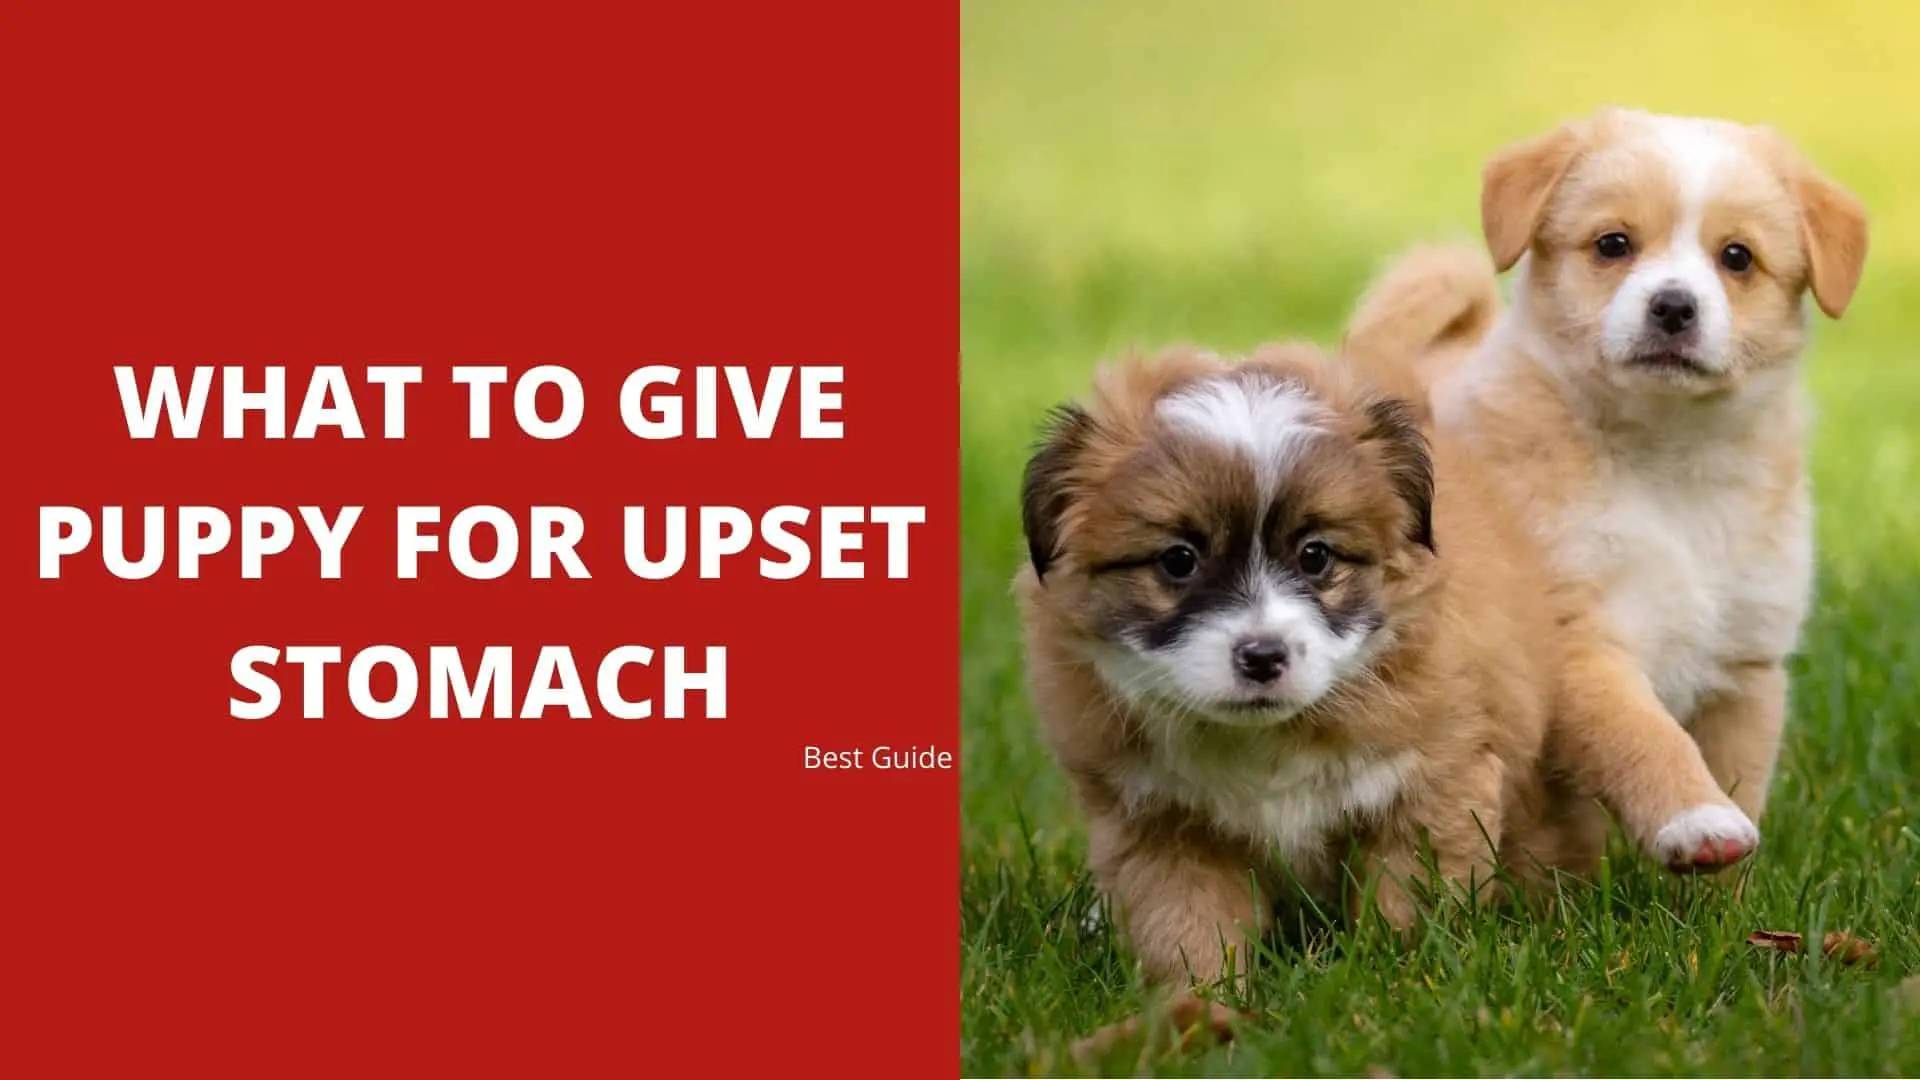 What to Give Puppy for Upset Stomach – Best Guide